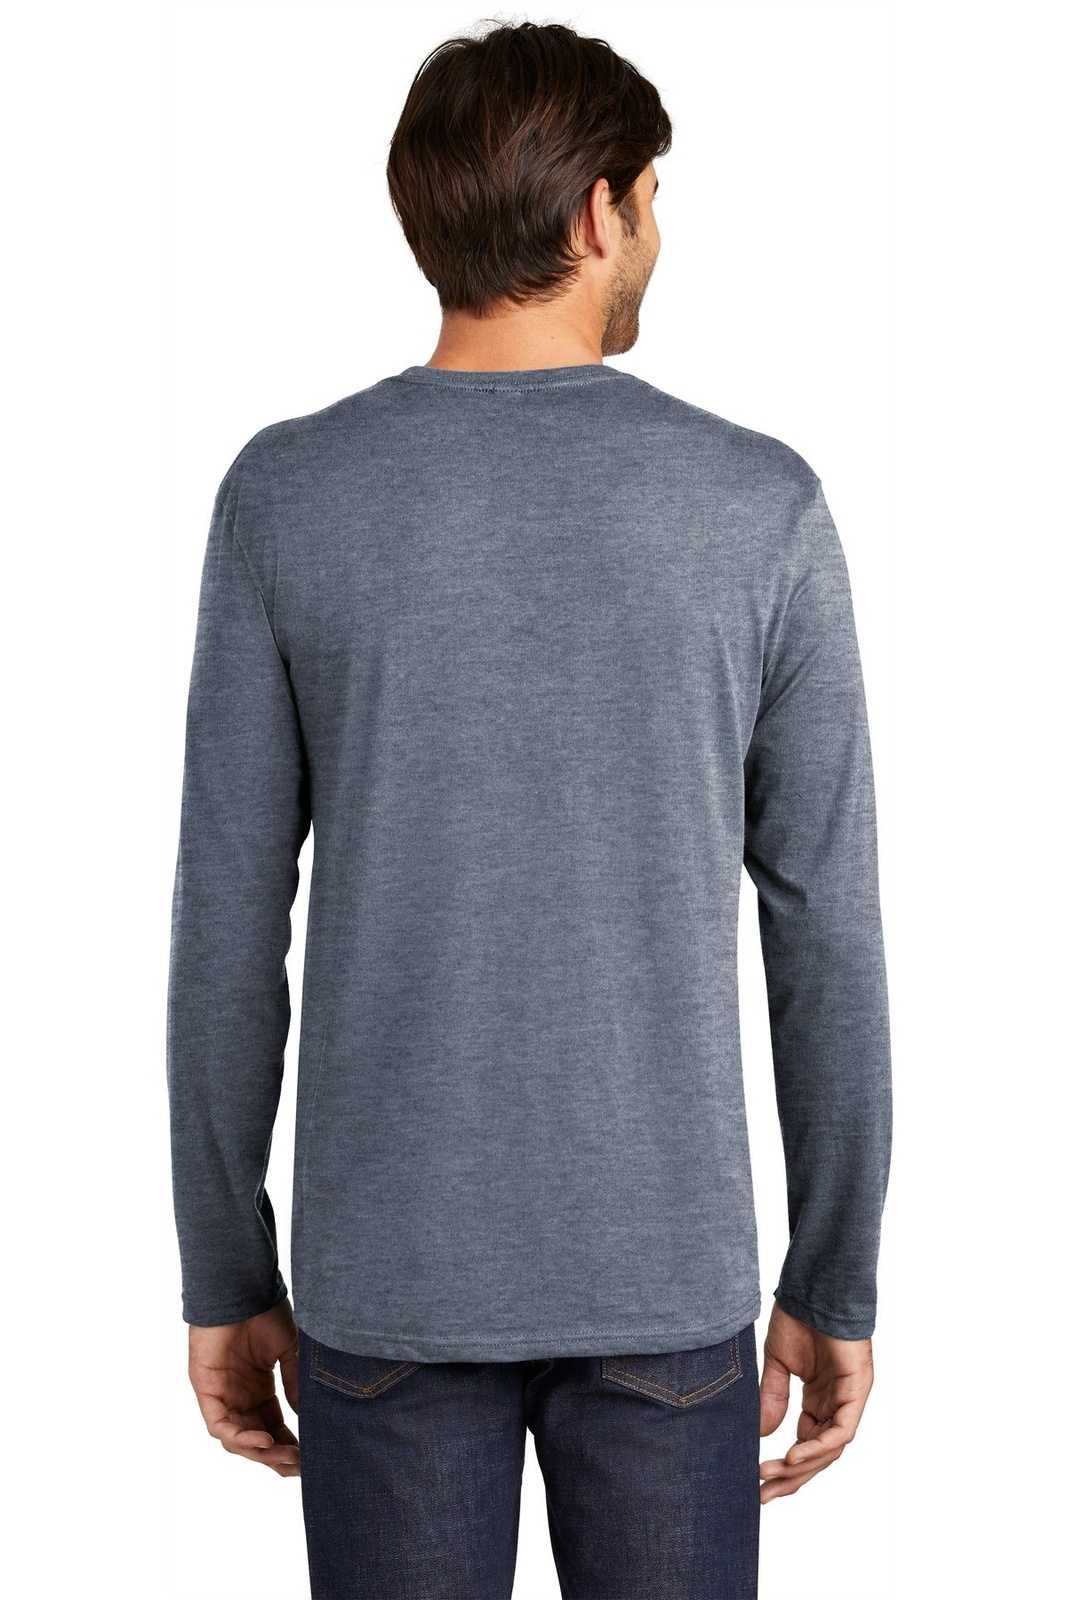 District DT105 Perfect Weight Long Sleeve Tee - Heathered Navy - HIT a Double - 1